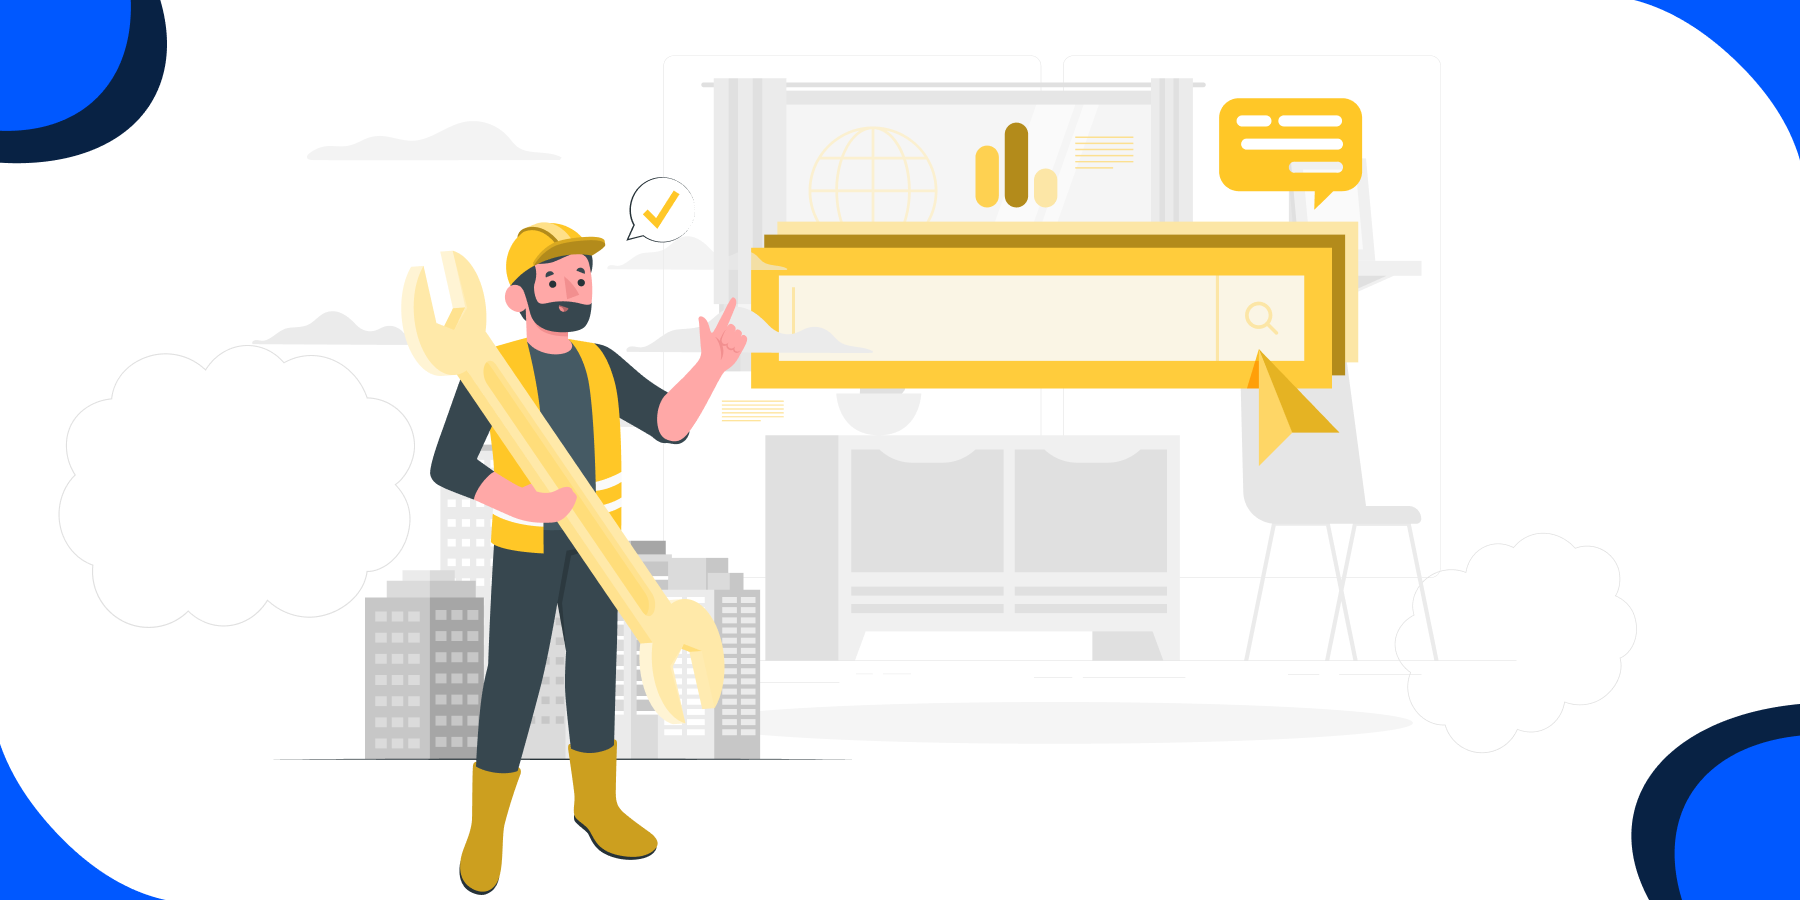 Illustration of a man holding a wrench, standing behind buildings pointing a web page and search bar.